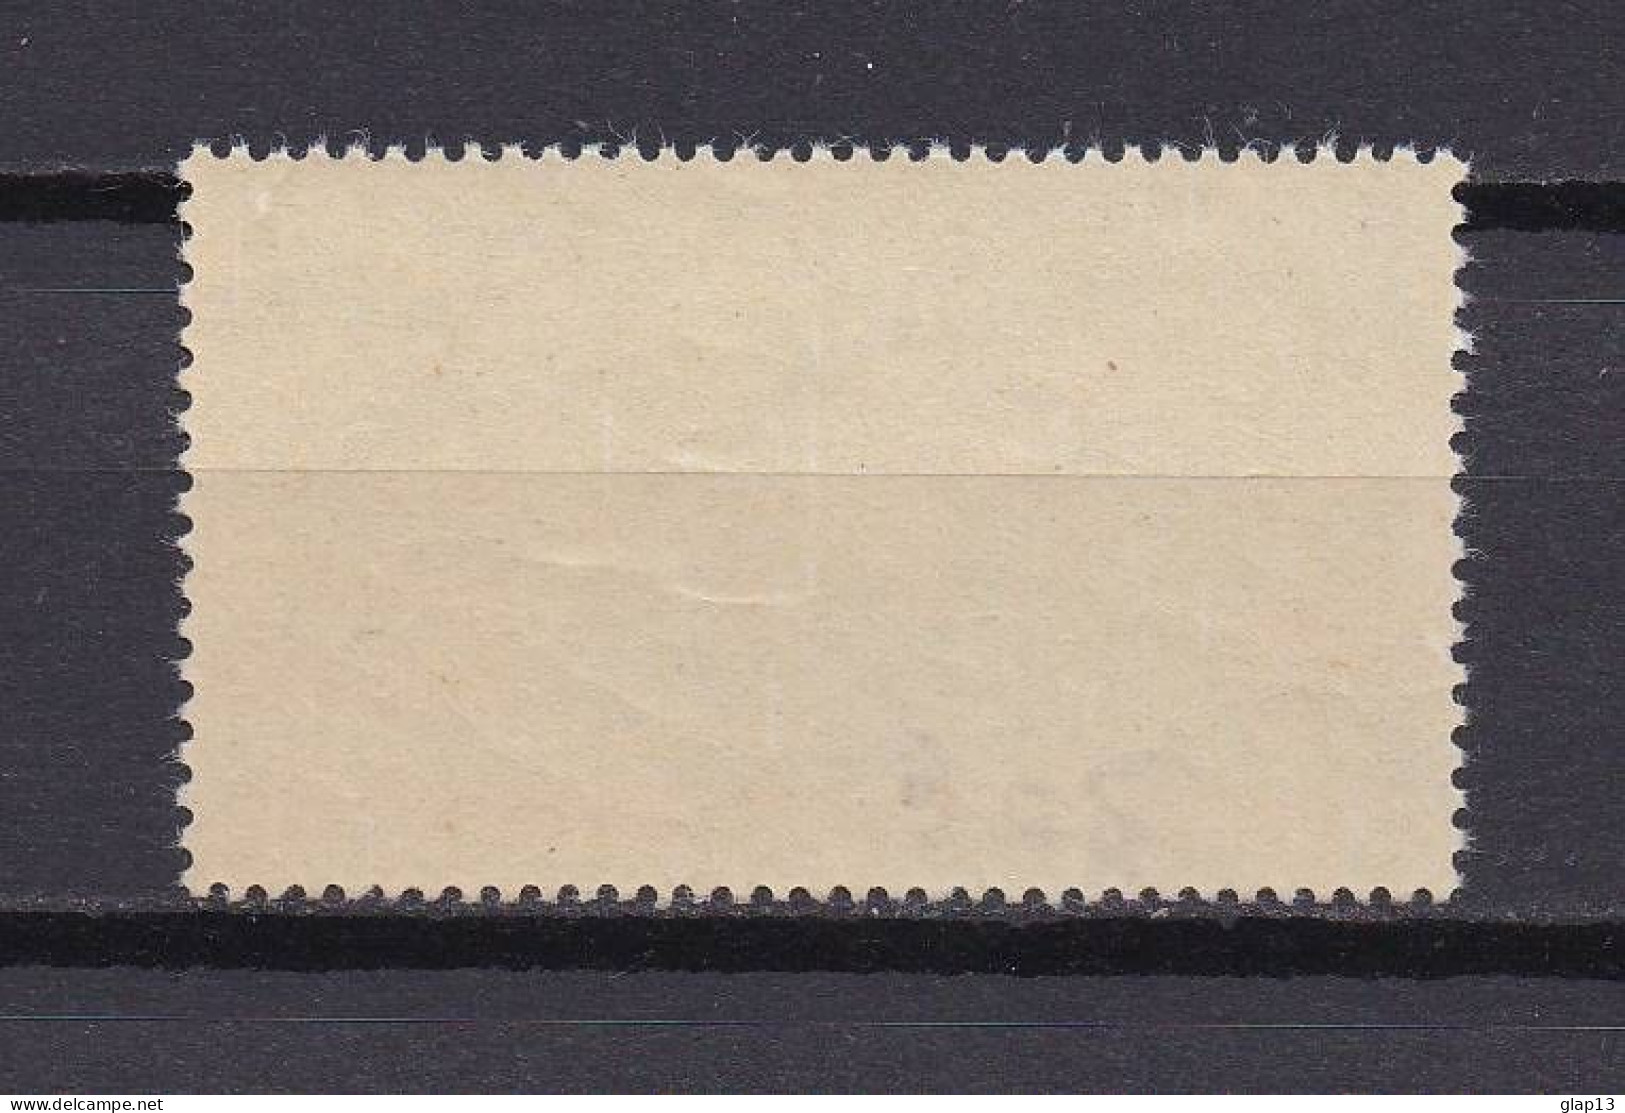 NOUVELLE-CALEDONIE 1962 TIMBRE N°305 NEUF AVEC CHARNIERE CONFERENCE - Ongebruikt